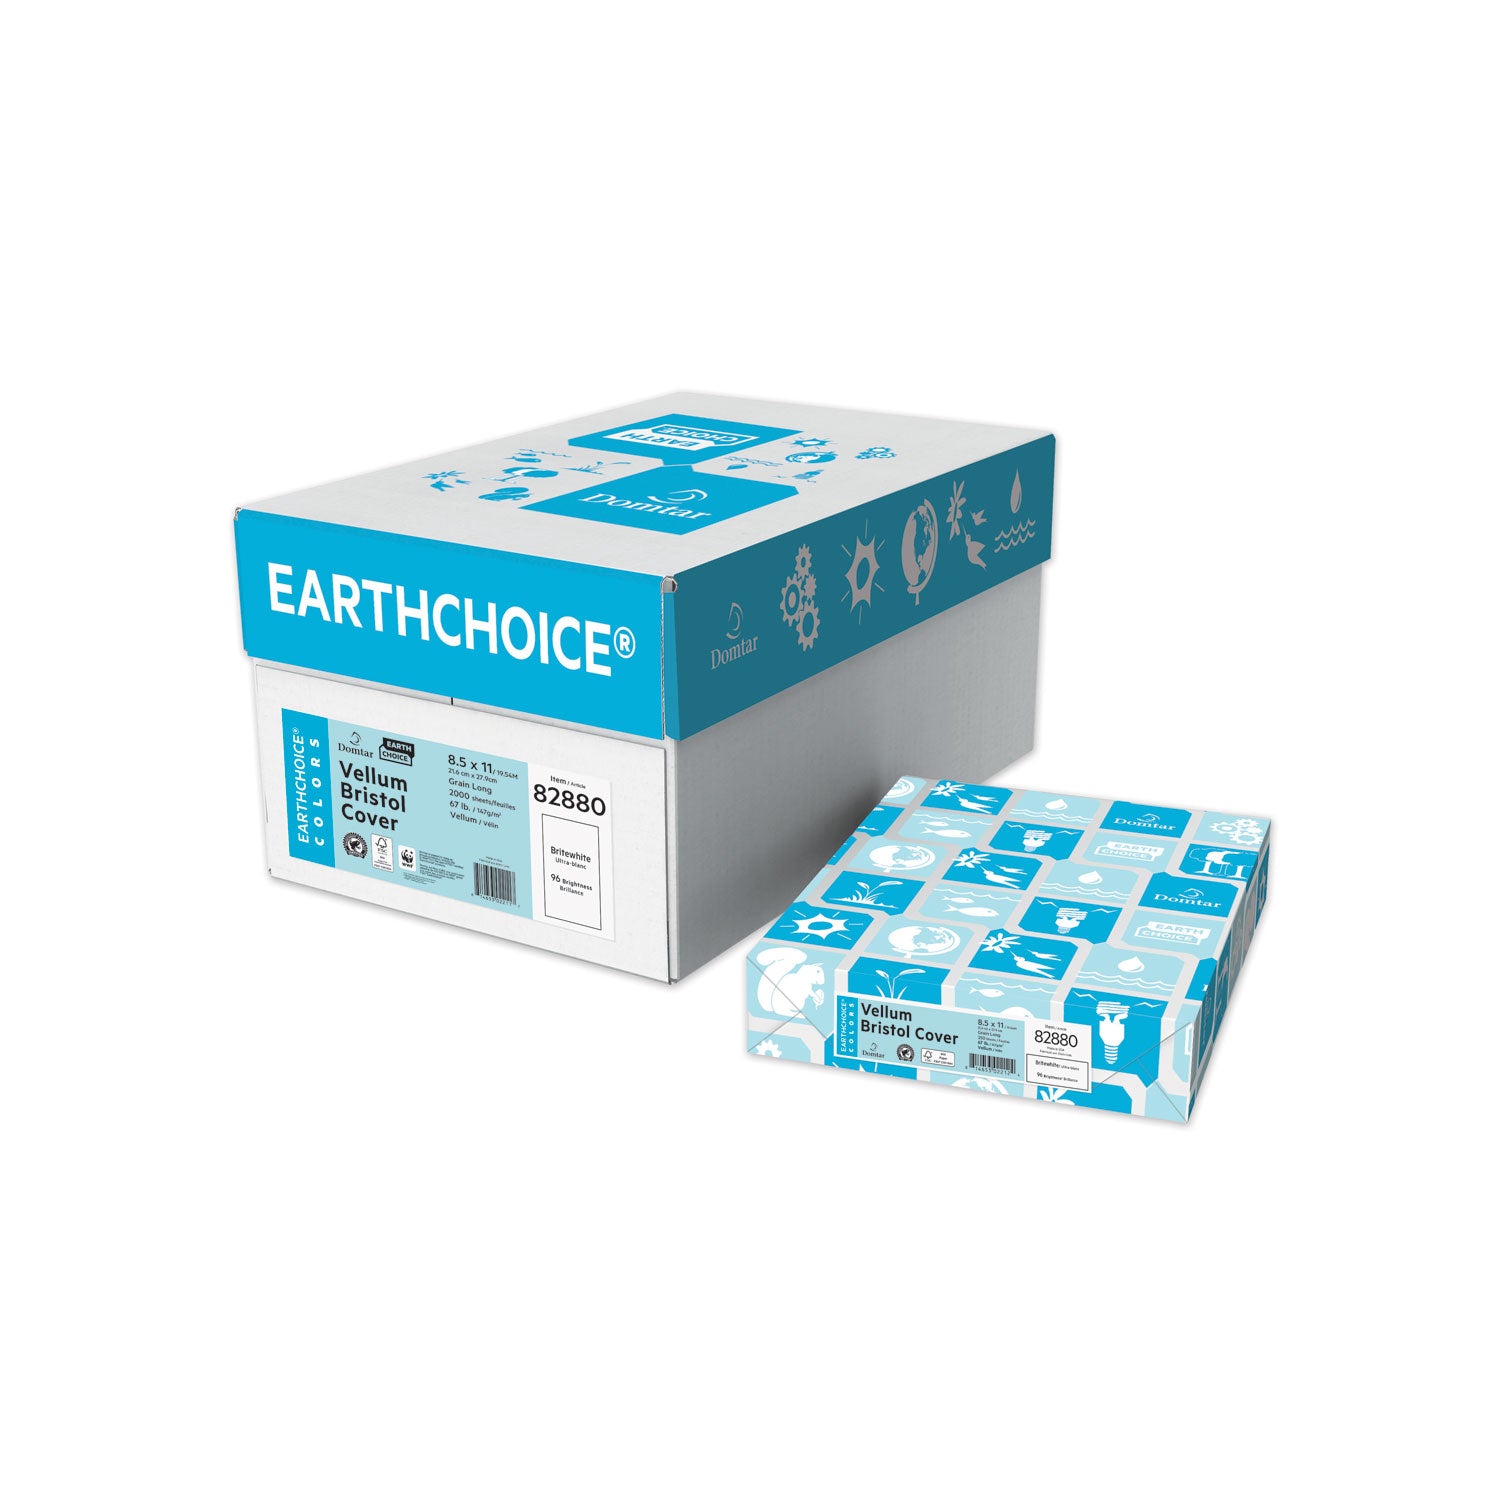 earthchoice-cover-stock-vellum-bristol-96-bright-67-lb-bristol-weight-85-x-11-bright-white-250-pack_dmr82880 - 1